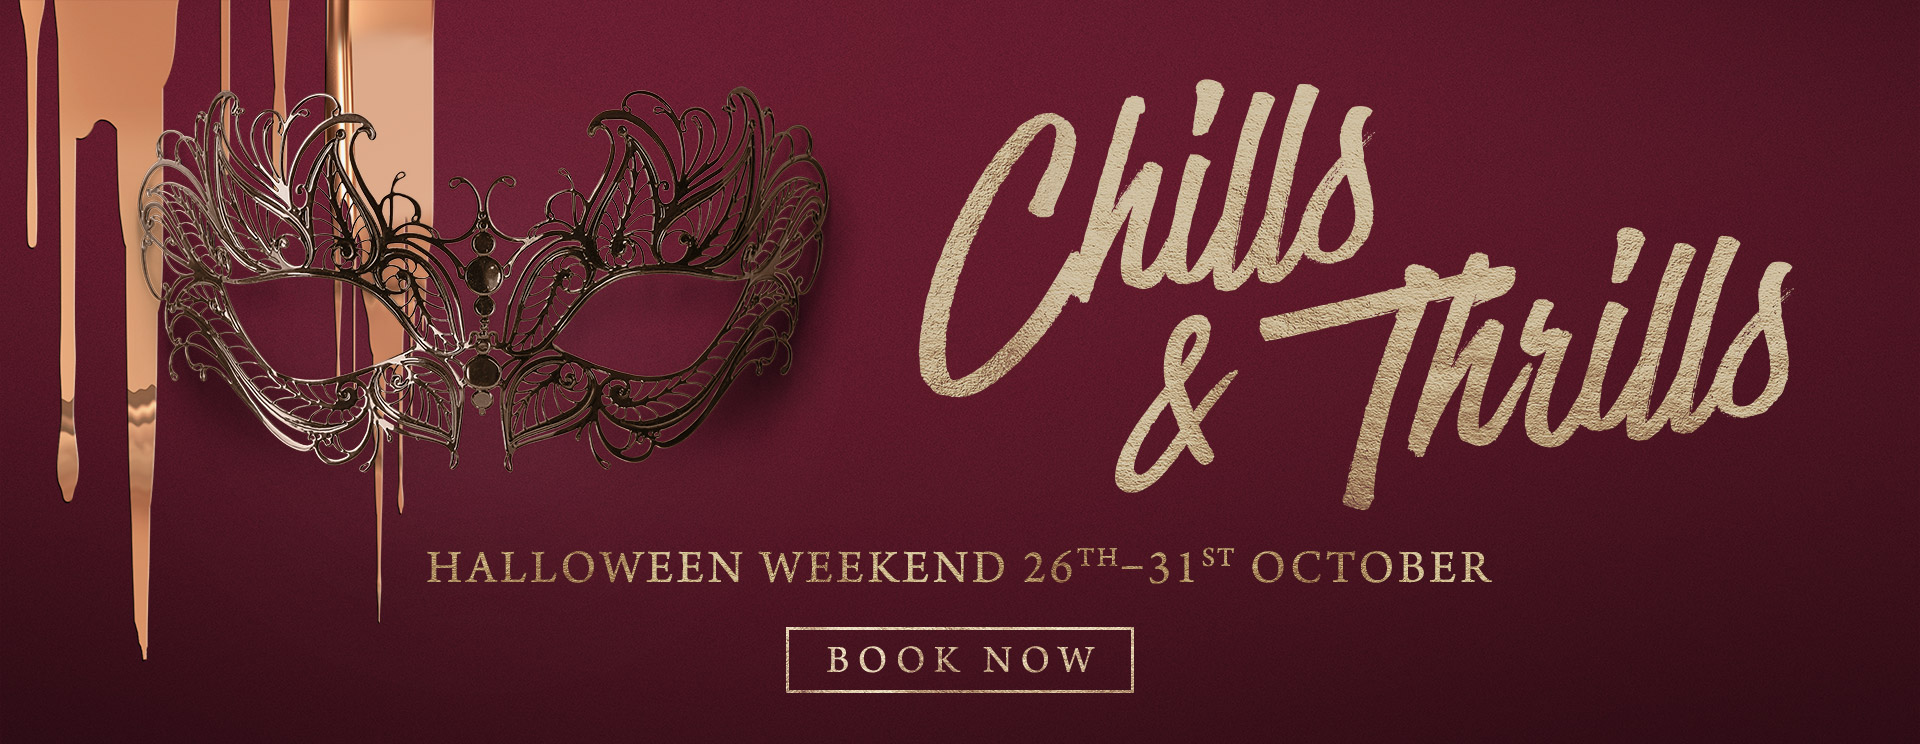 Chills & Thrills this Halloween at The Rams Head